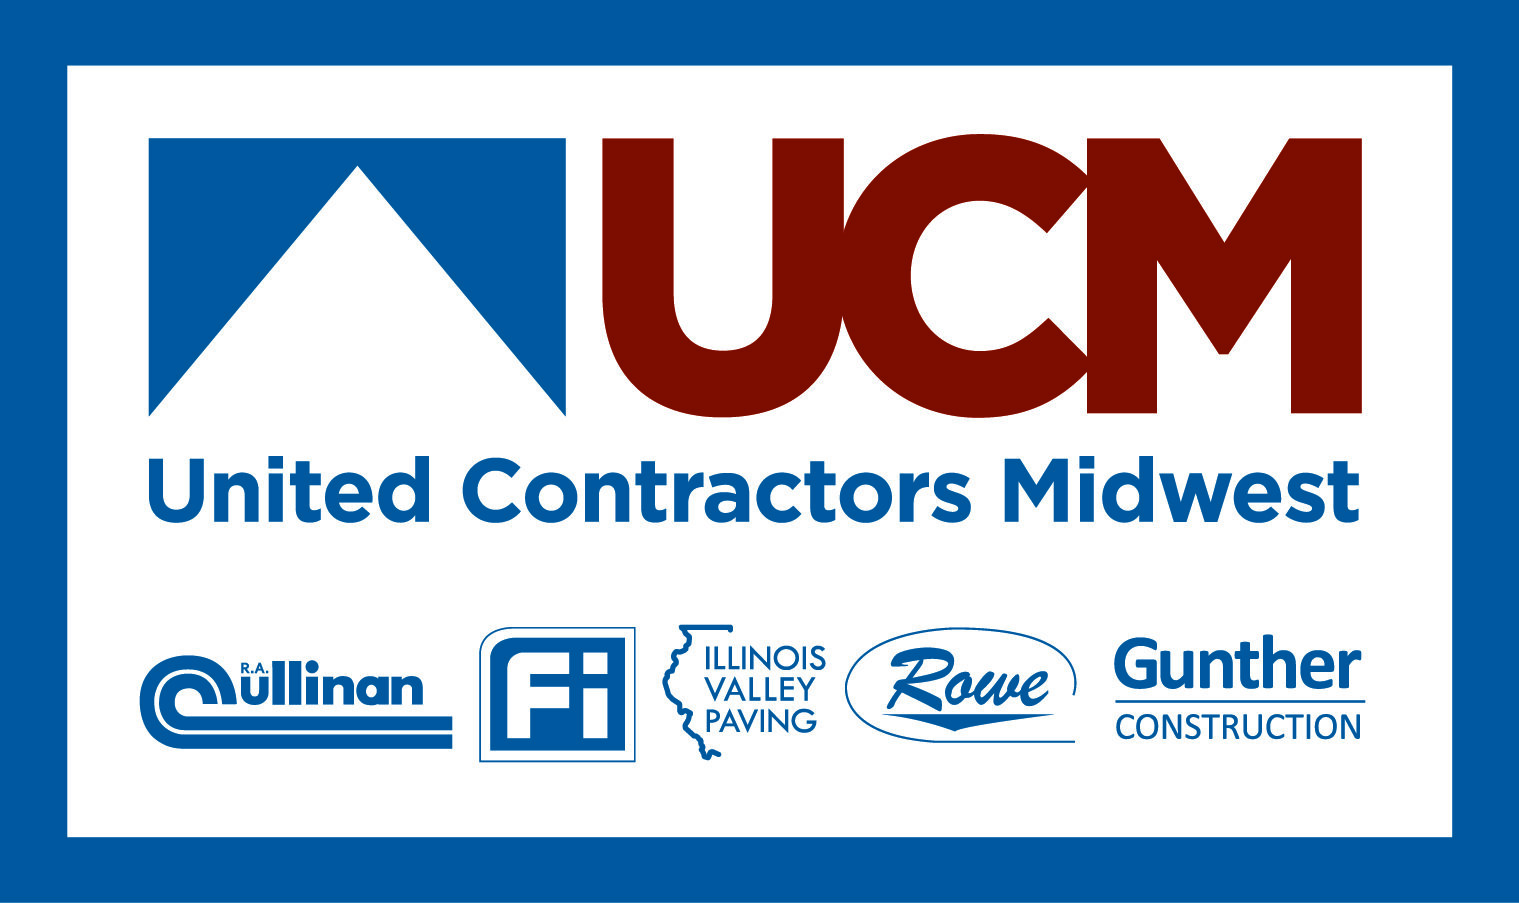 United Contractors Midwest